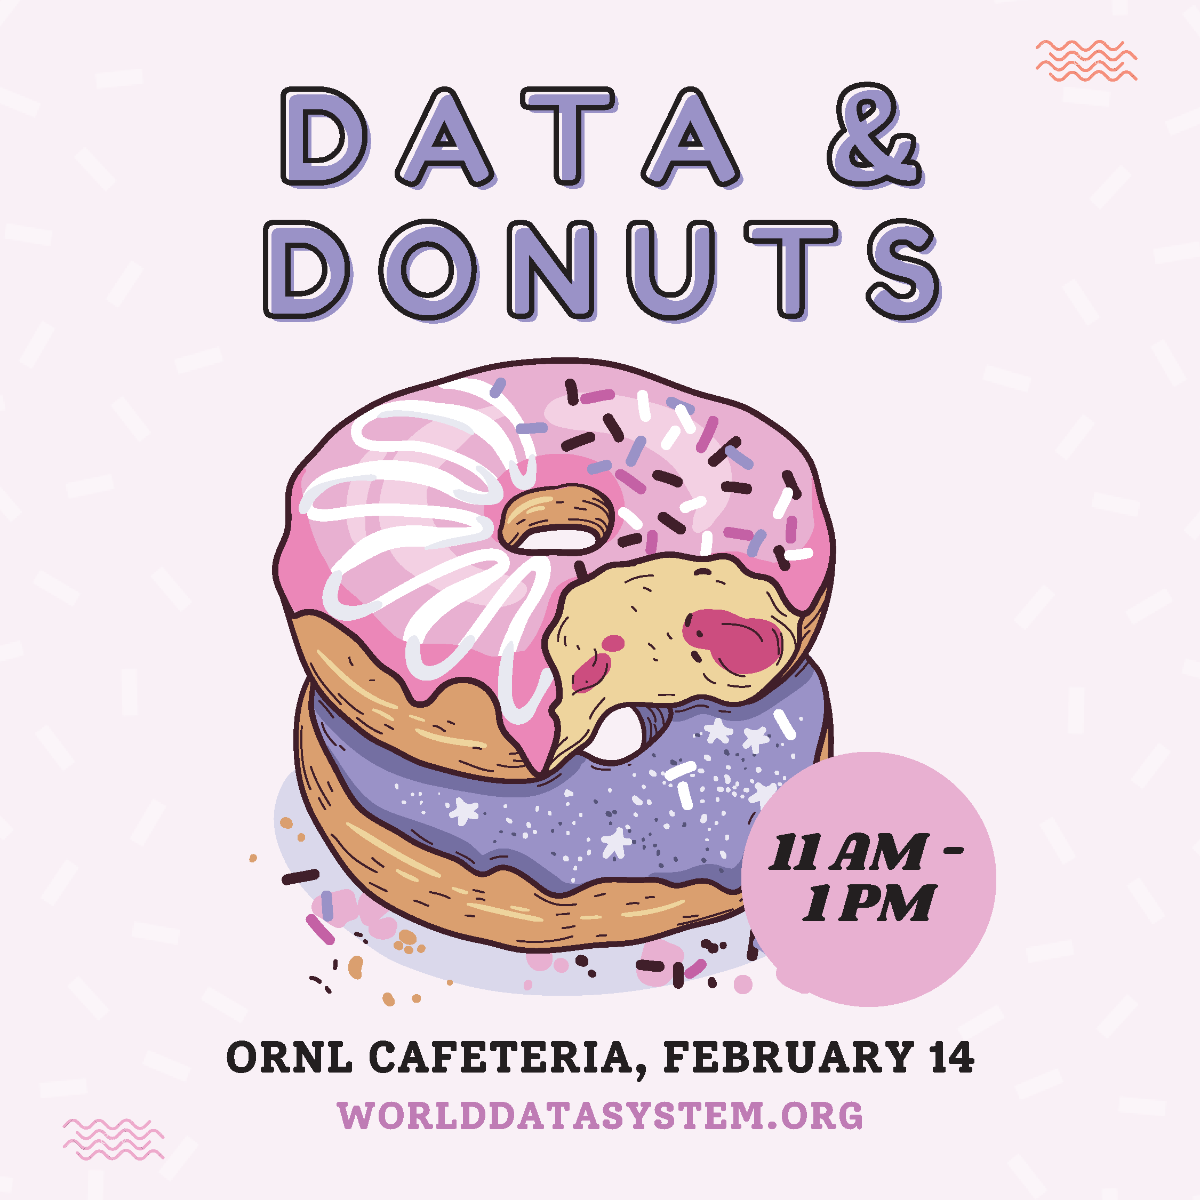 Data and Donuts event on 14 February 2023